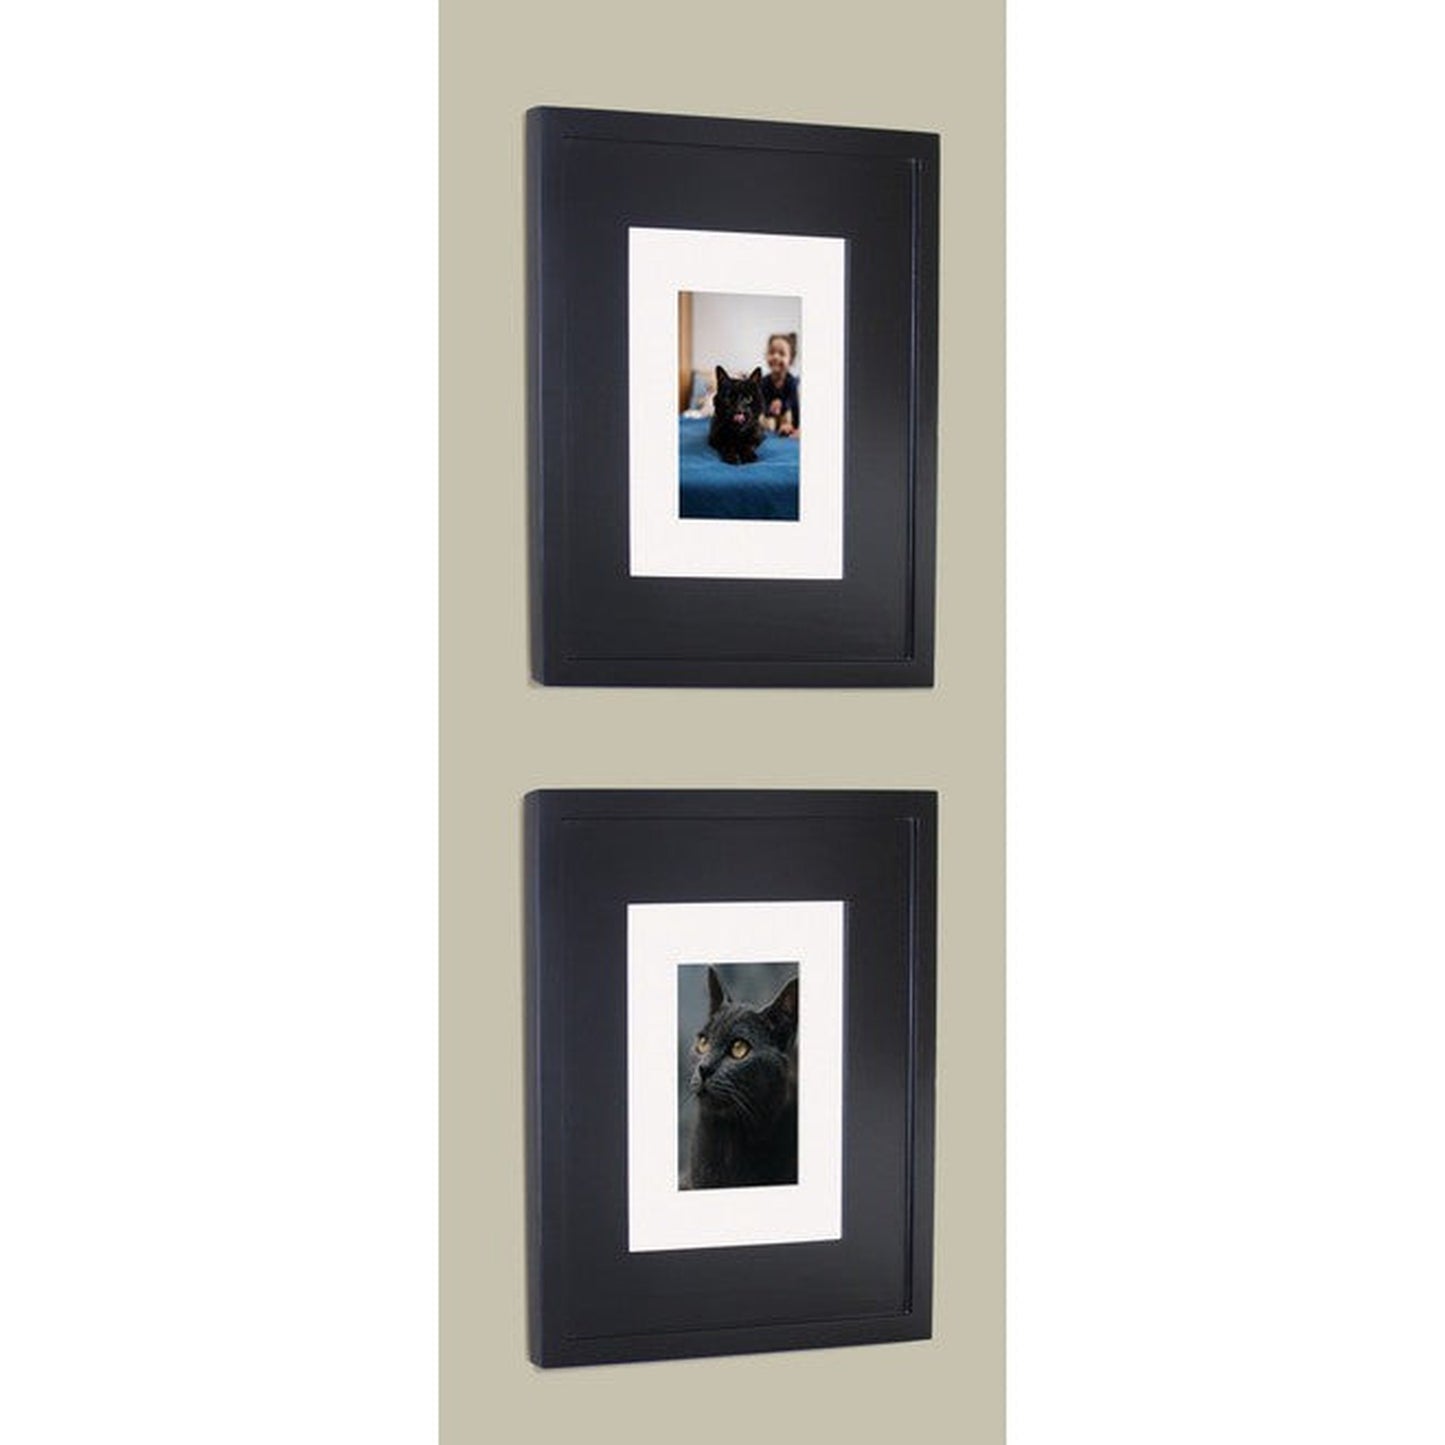 Fox Hollow Furnishings 11" x 14" Black Compact Portrait Special 3" Depth Recessed Picture Frame Medicine Cabinet